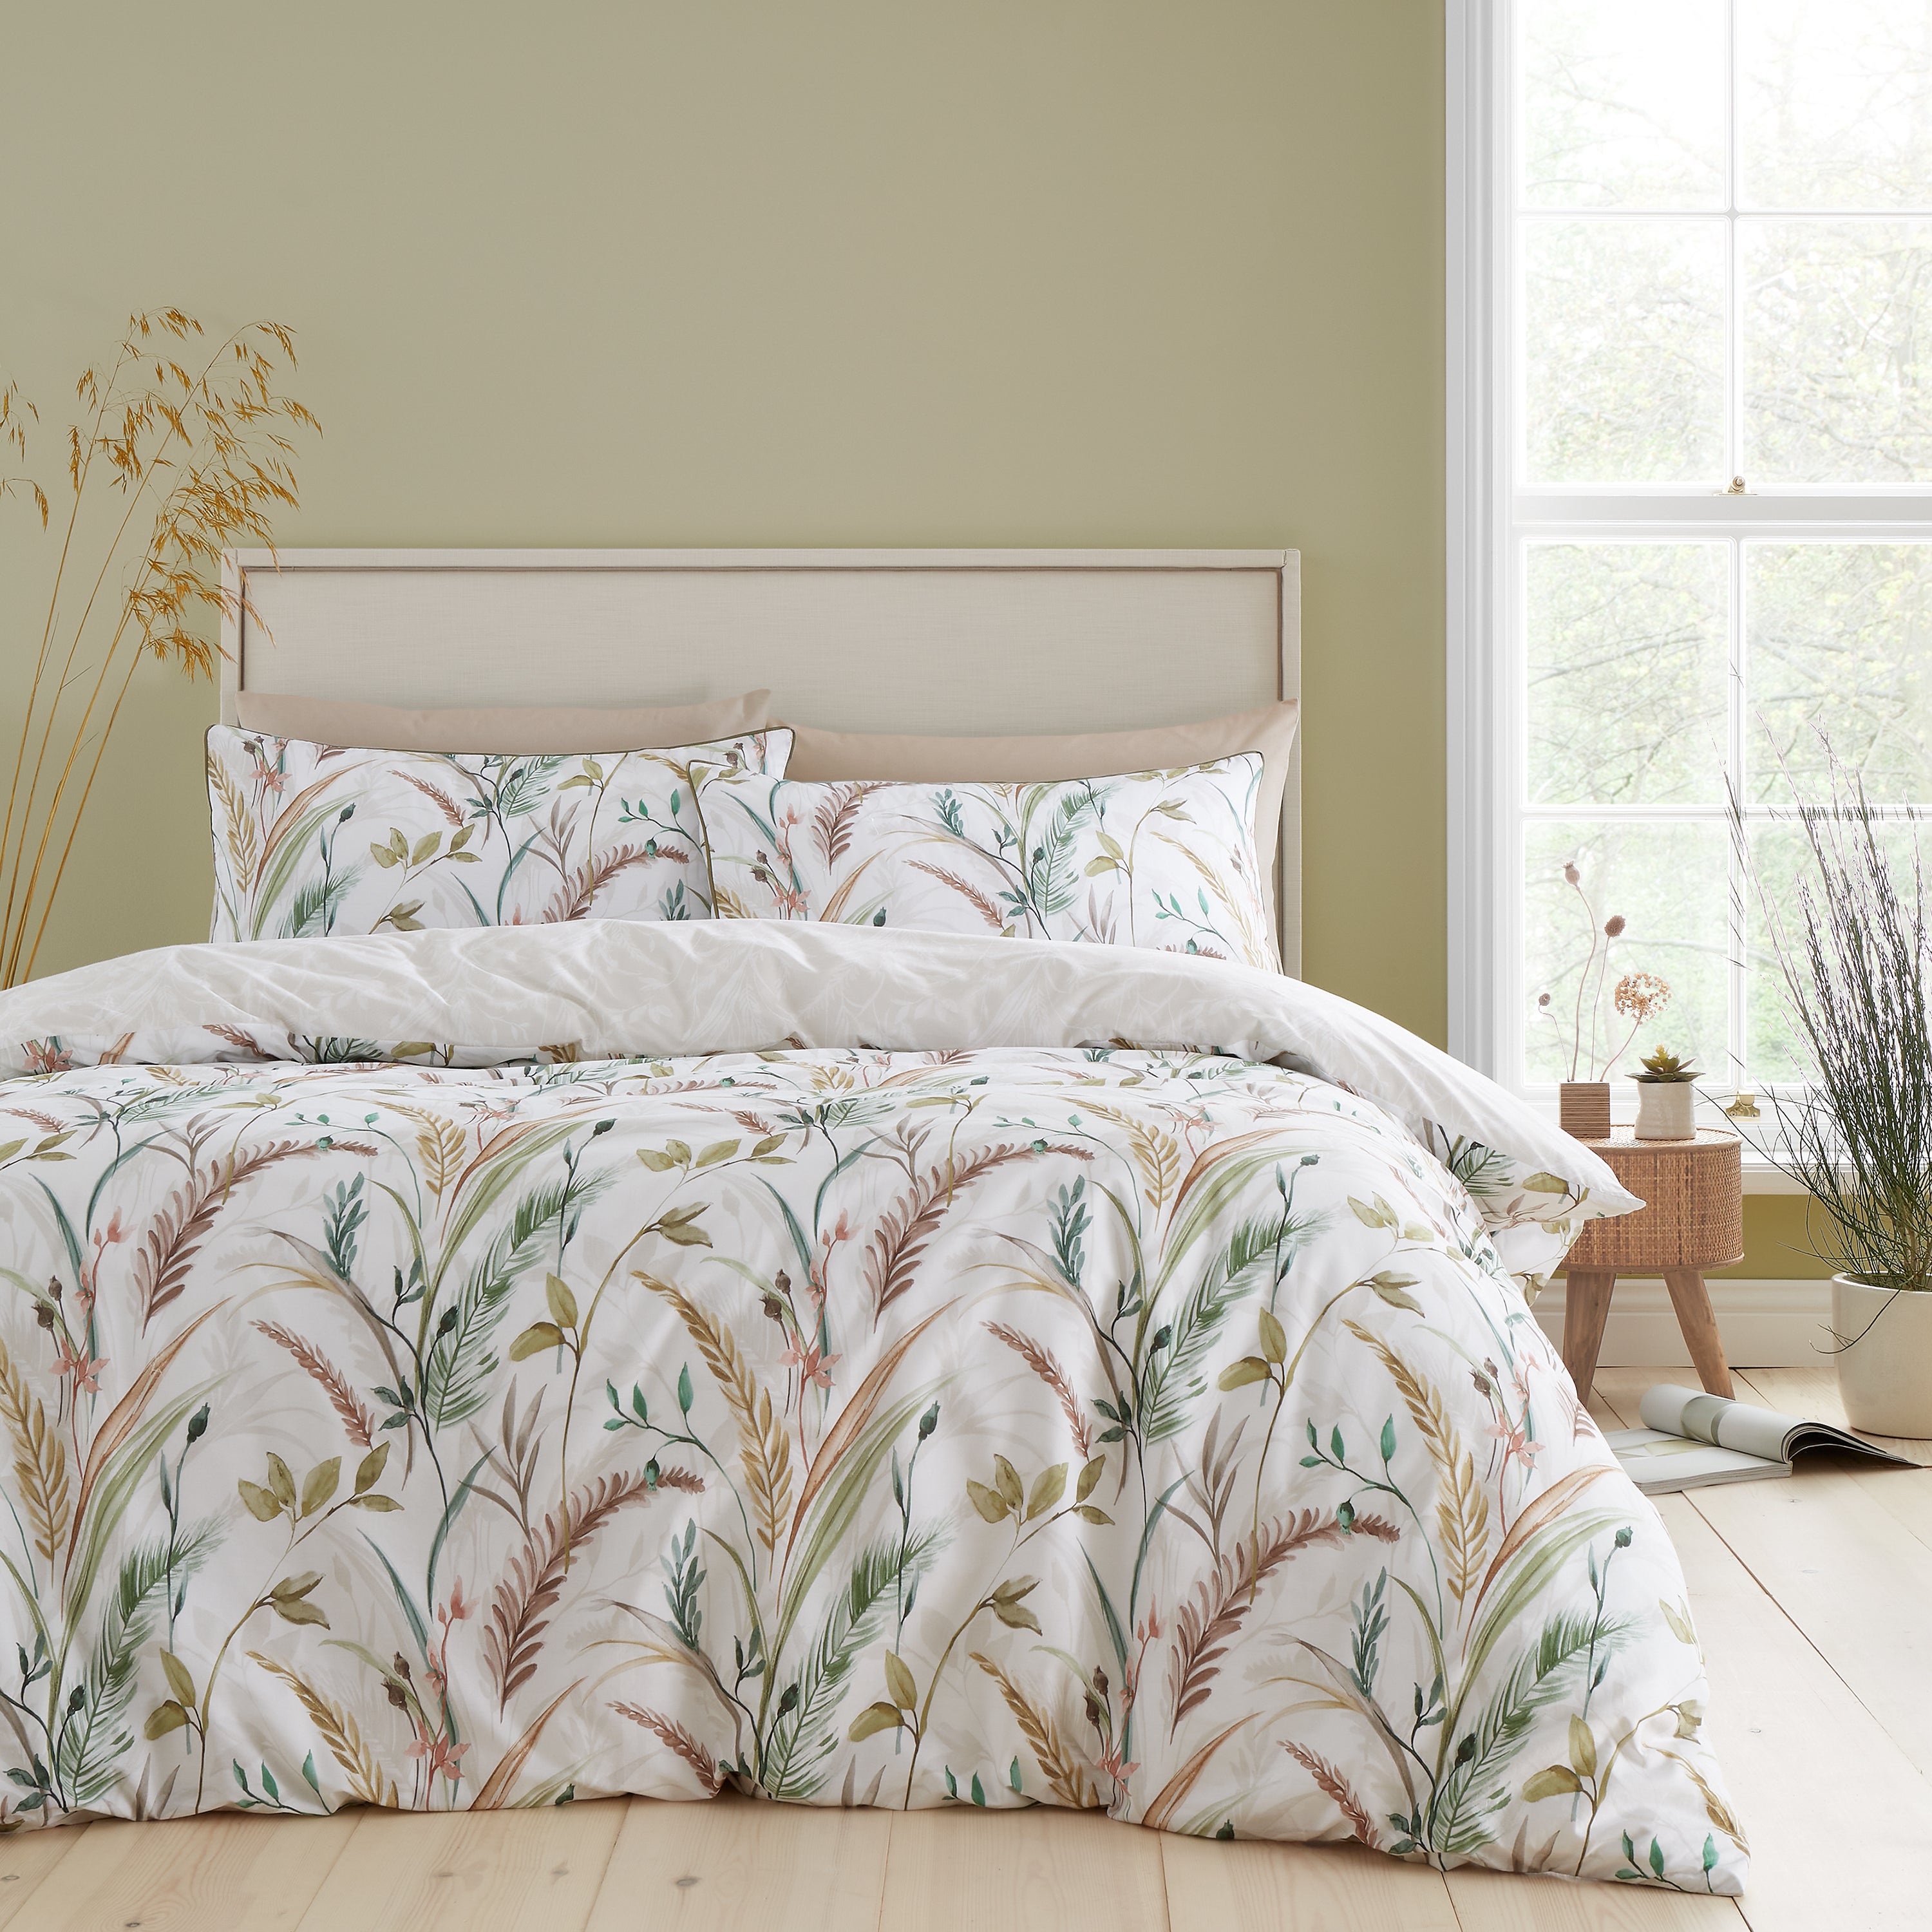 Rhs Ornamental Grasses 200 Thread Count Natural Cotton Reversible Duvet Cover And Pillowcase Set Whitebrowngreen